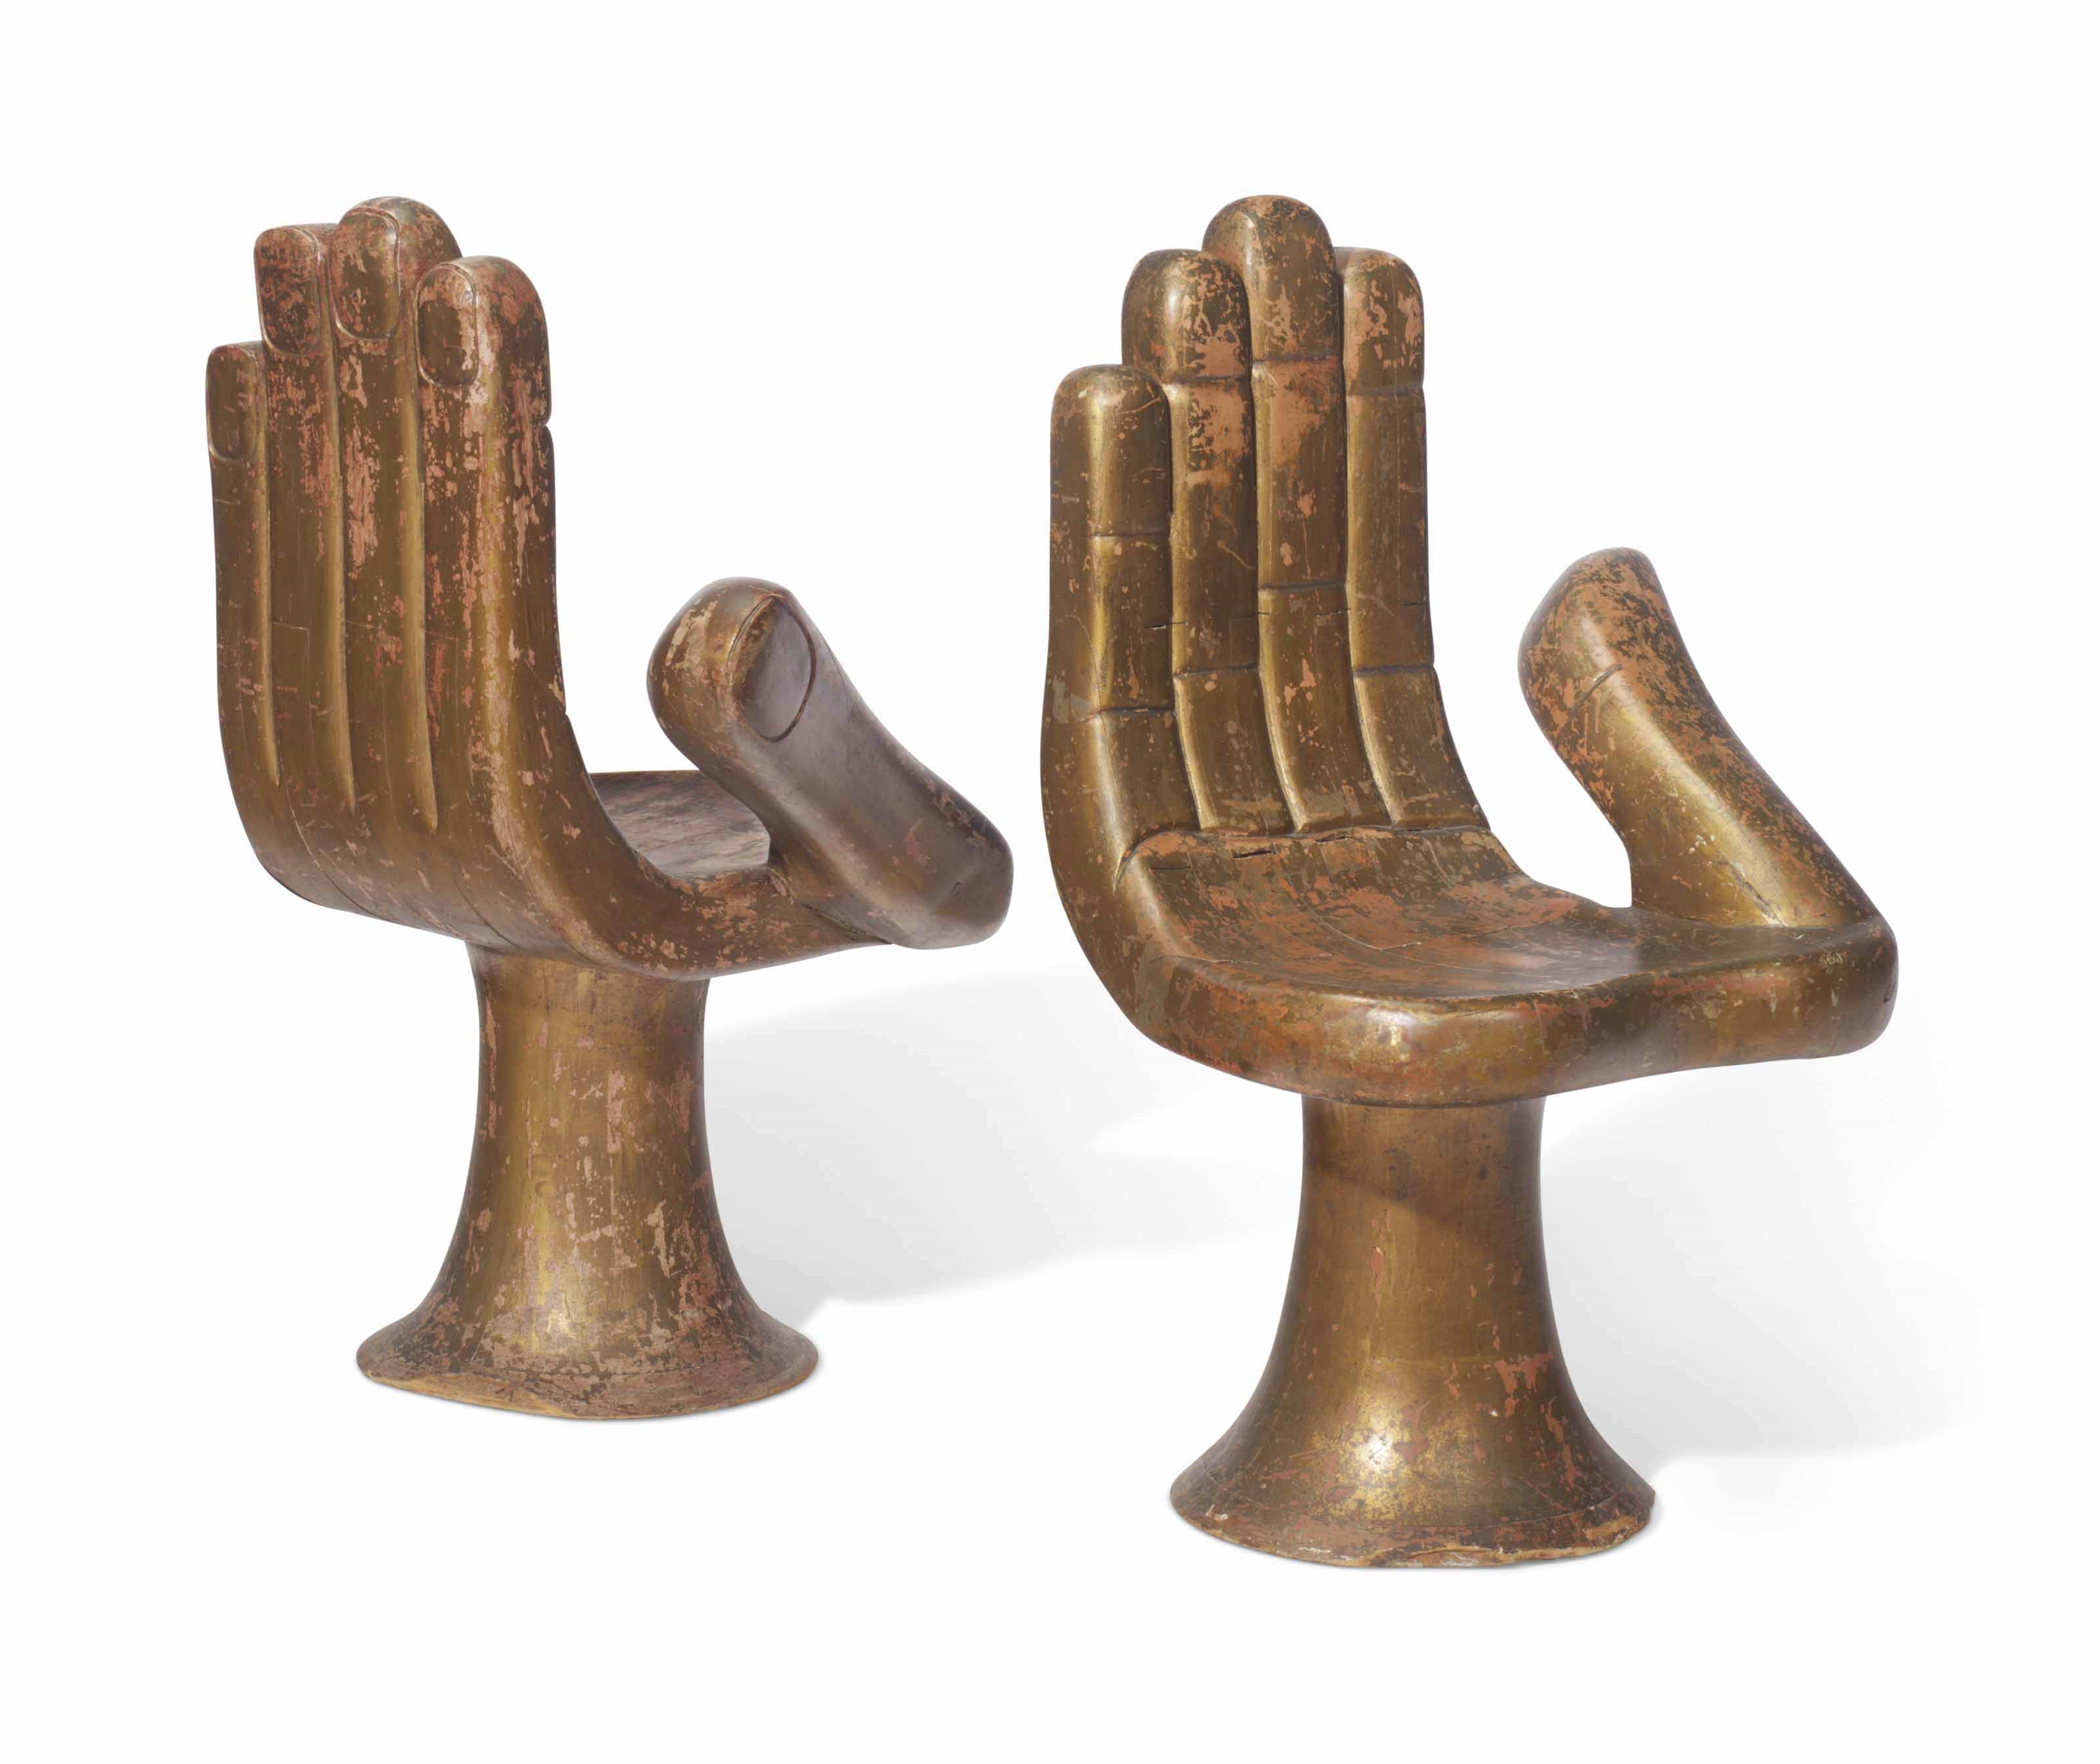 Artwork by Pedro Friedeberg, Hand Chair (a pair), Made of hand carved wood with gold leaf